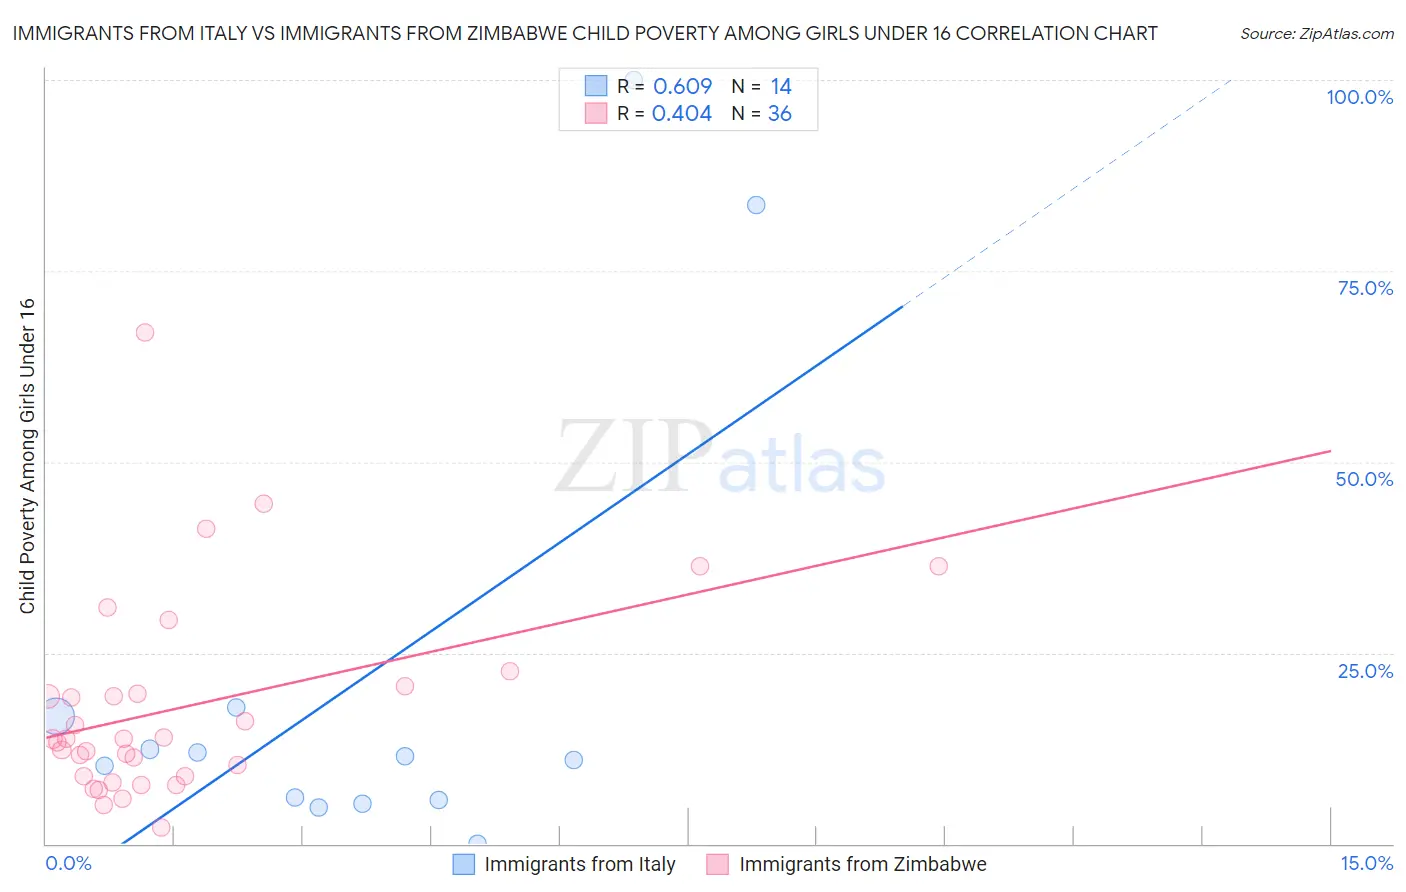 Immigrants from Italy vs Immigrants from Zimbabwe Child Poverty Among Girls Under 16